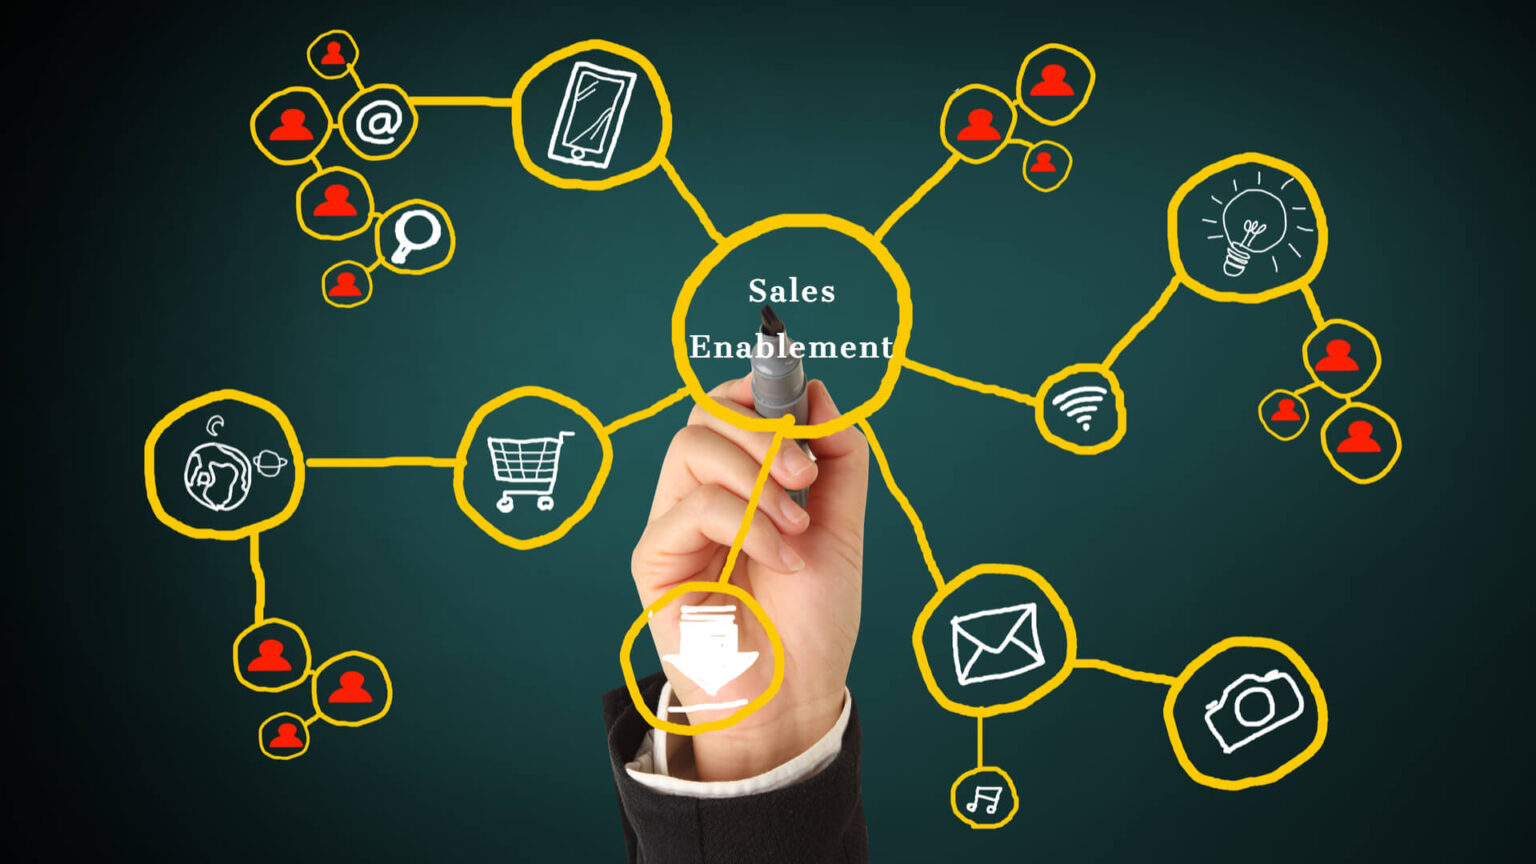 sales-enablement-tool-the-right-choice-for-every-business